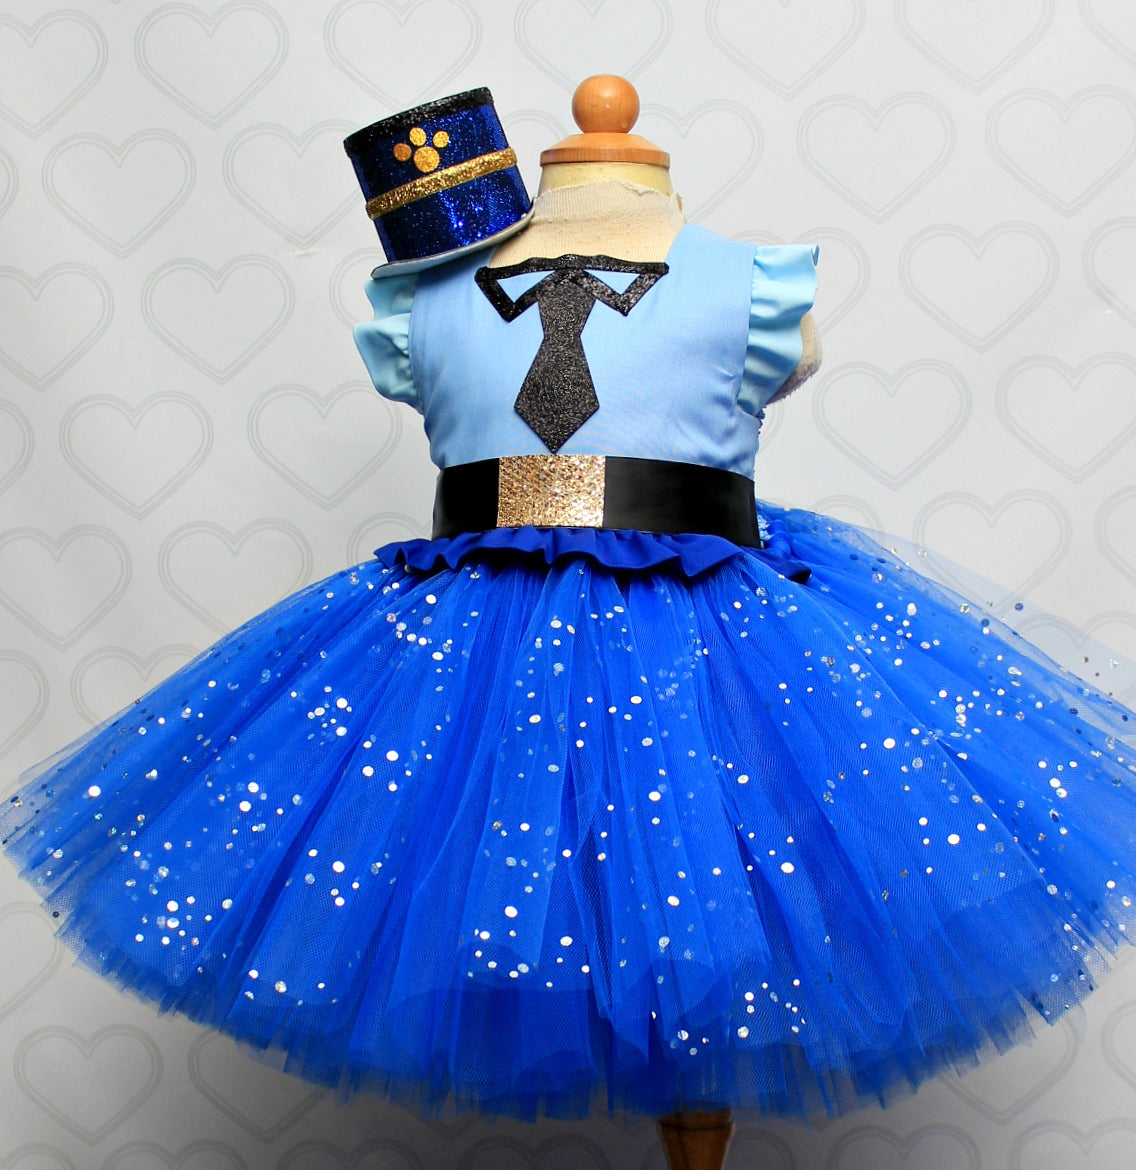 Giggle Mcdimples Dress-Giggle Mcdimples tutu set-Giggle Mcdimples outfit-Giggle Mcdimples tutu dress-Toy story costume